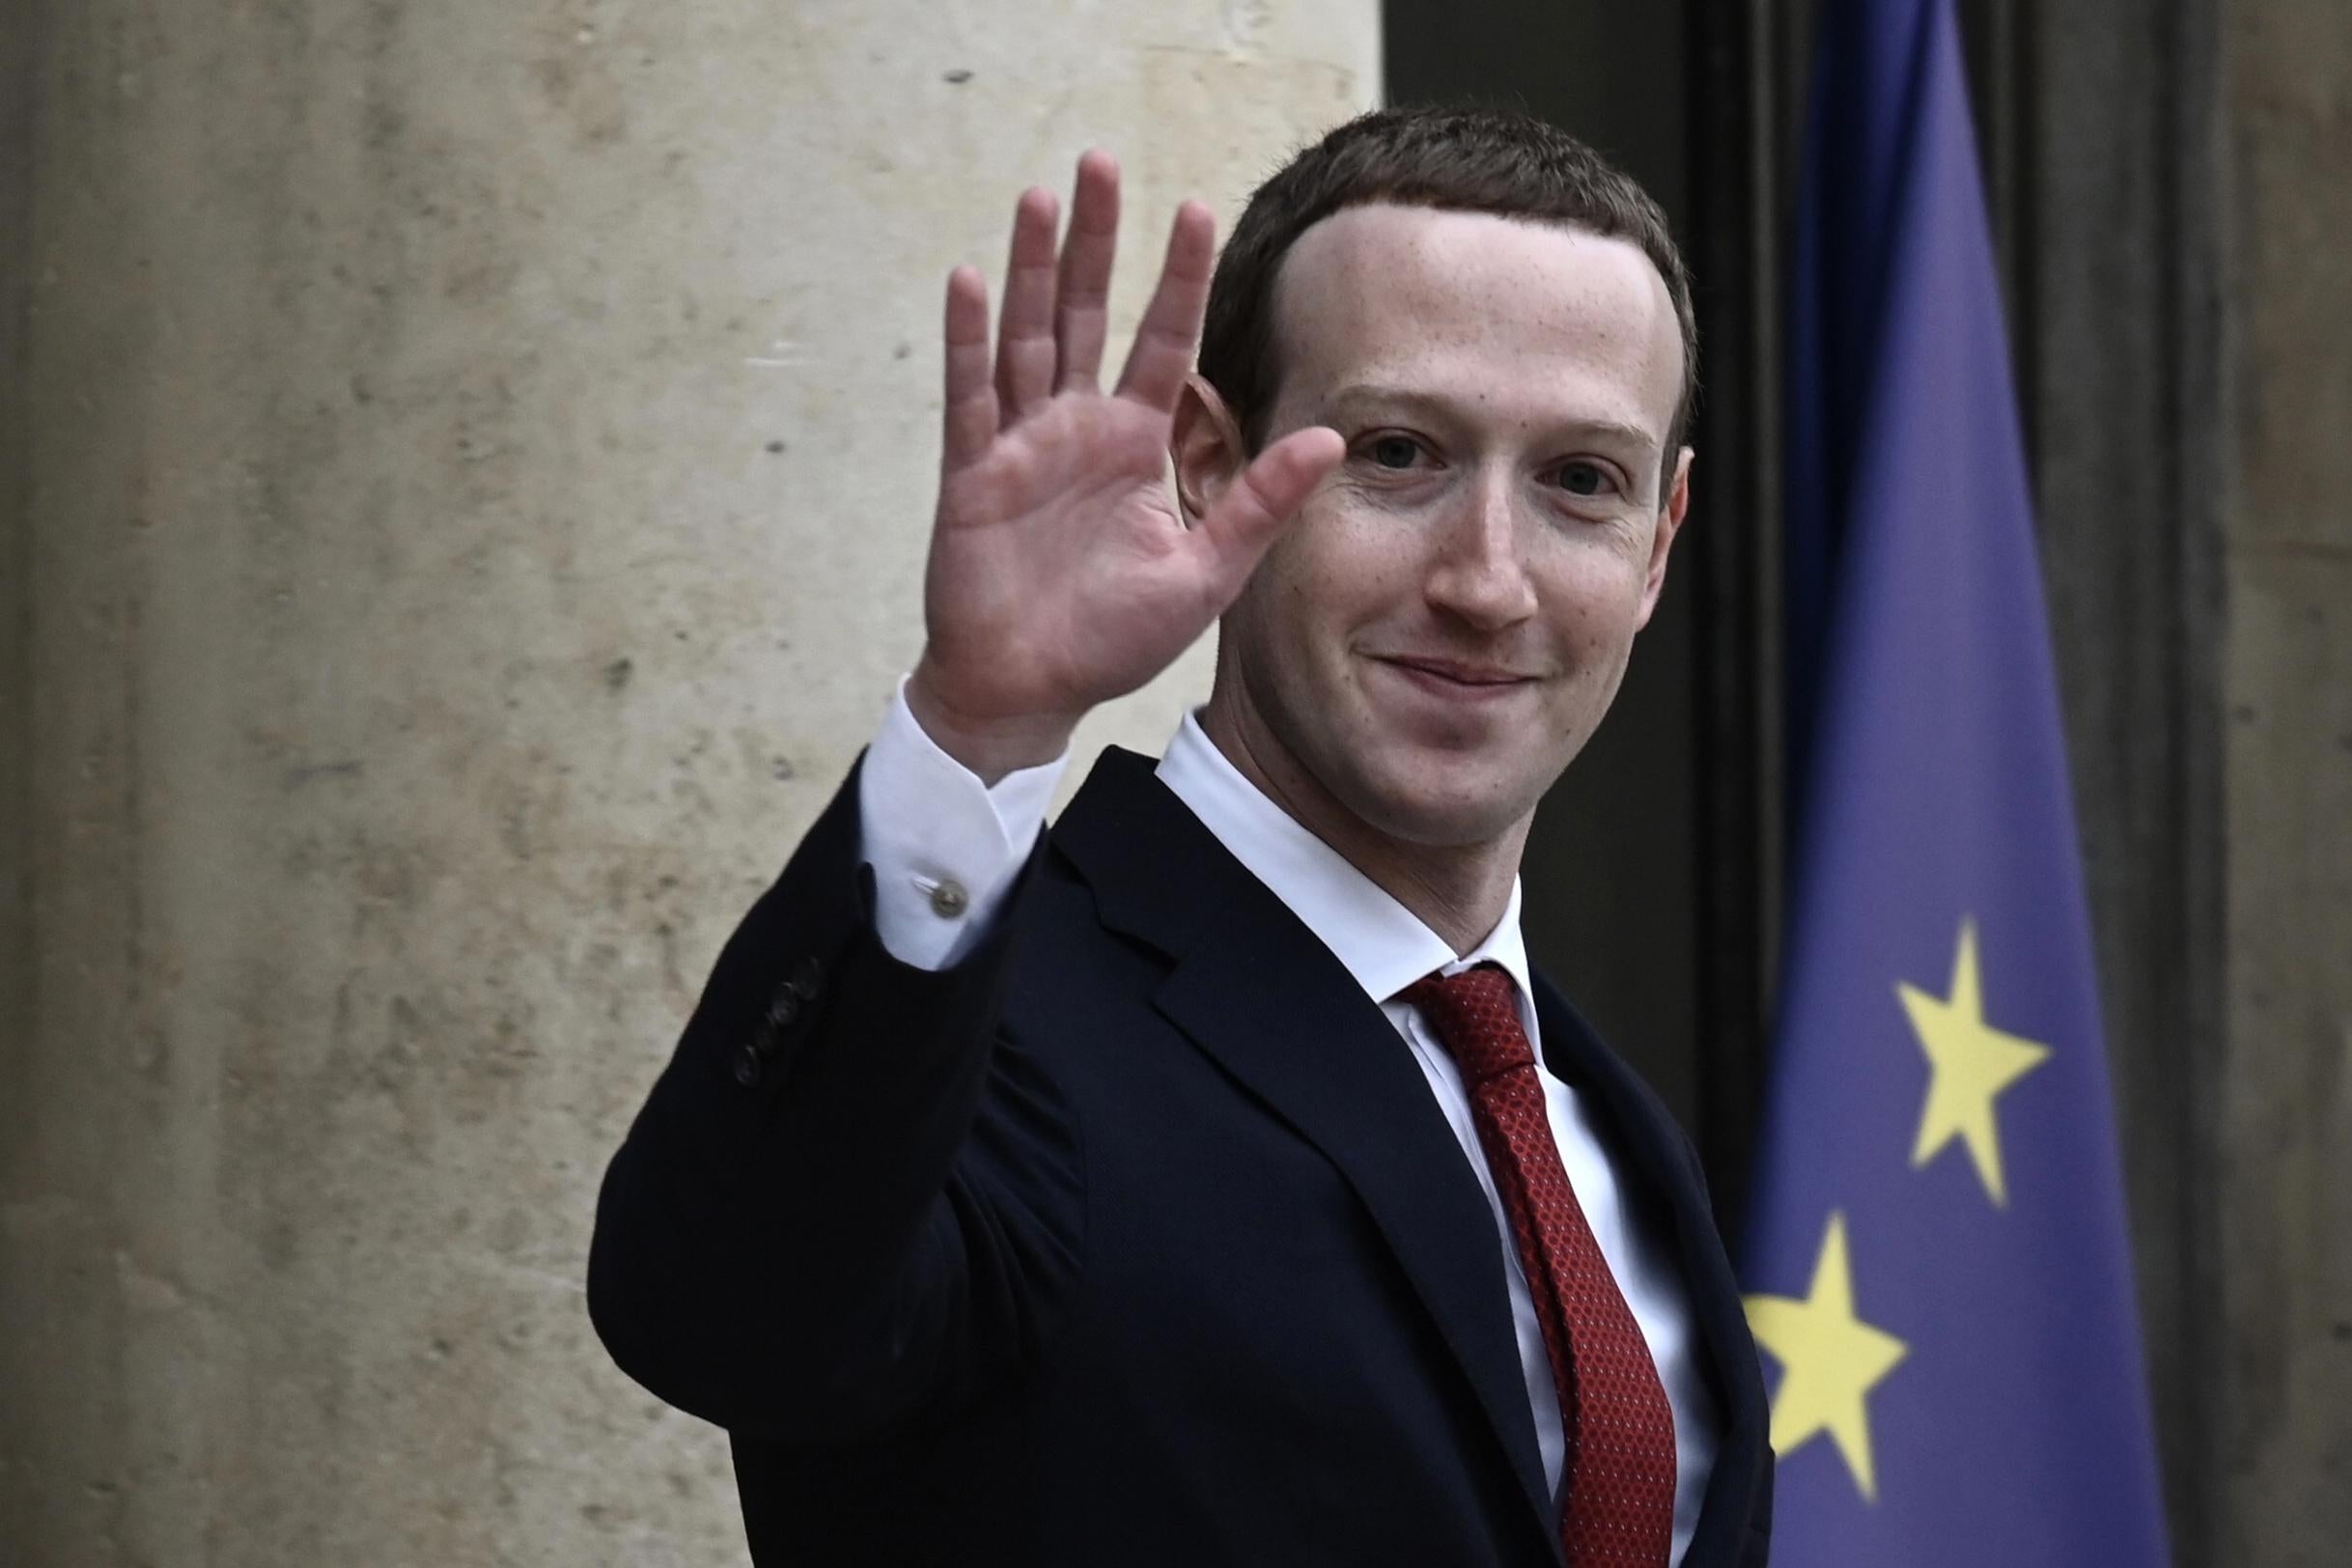 Facebook chief Mark Zuckerberg as he leaves the Elysee Palace in Paris on May 10, 2019.